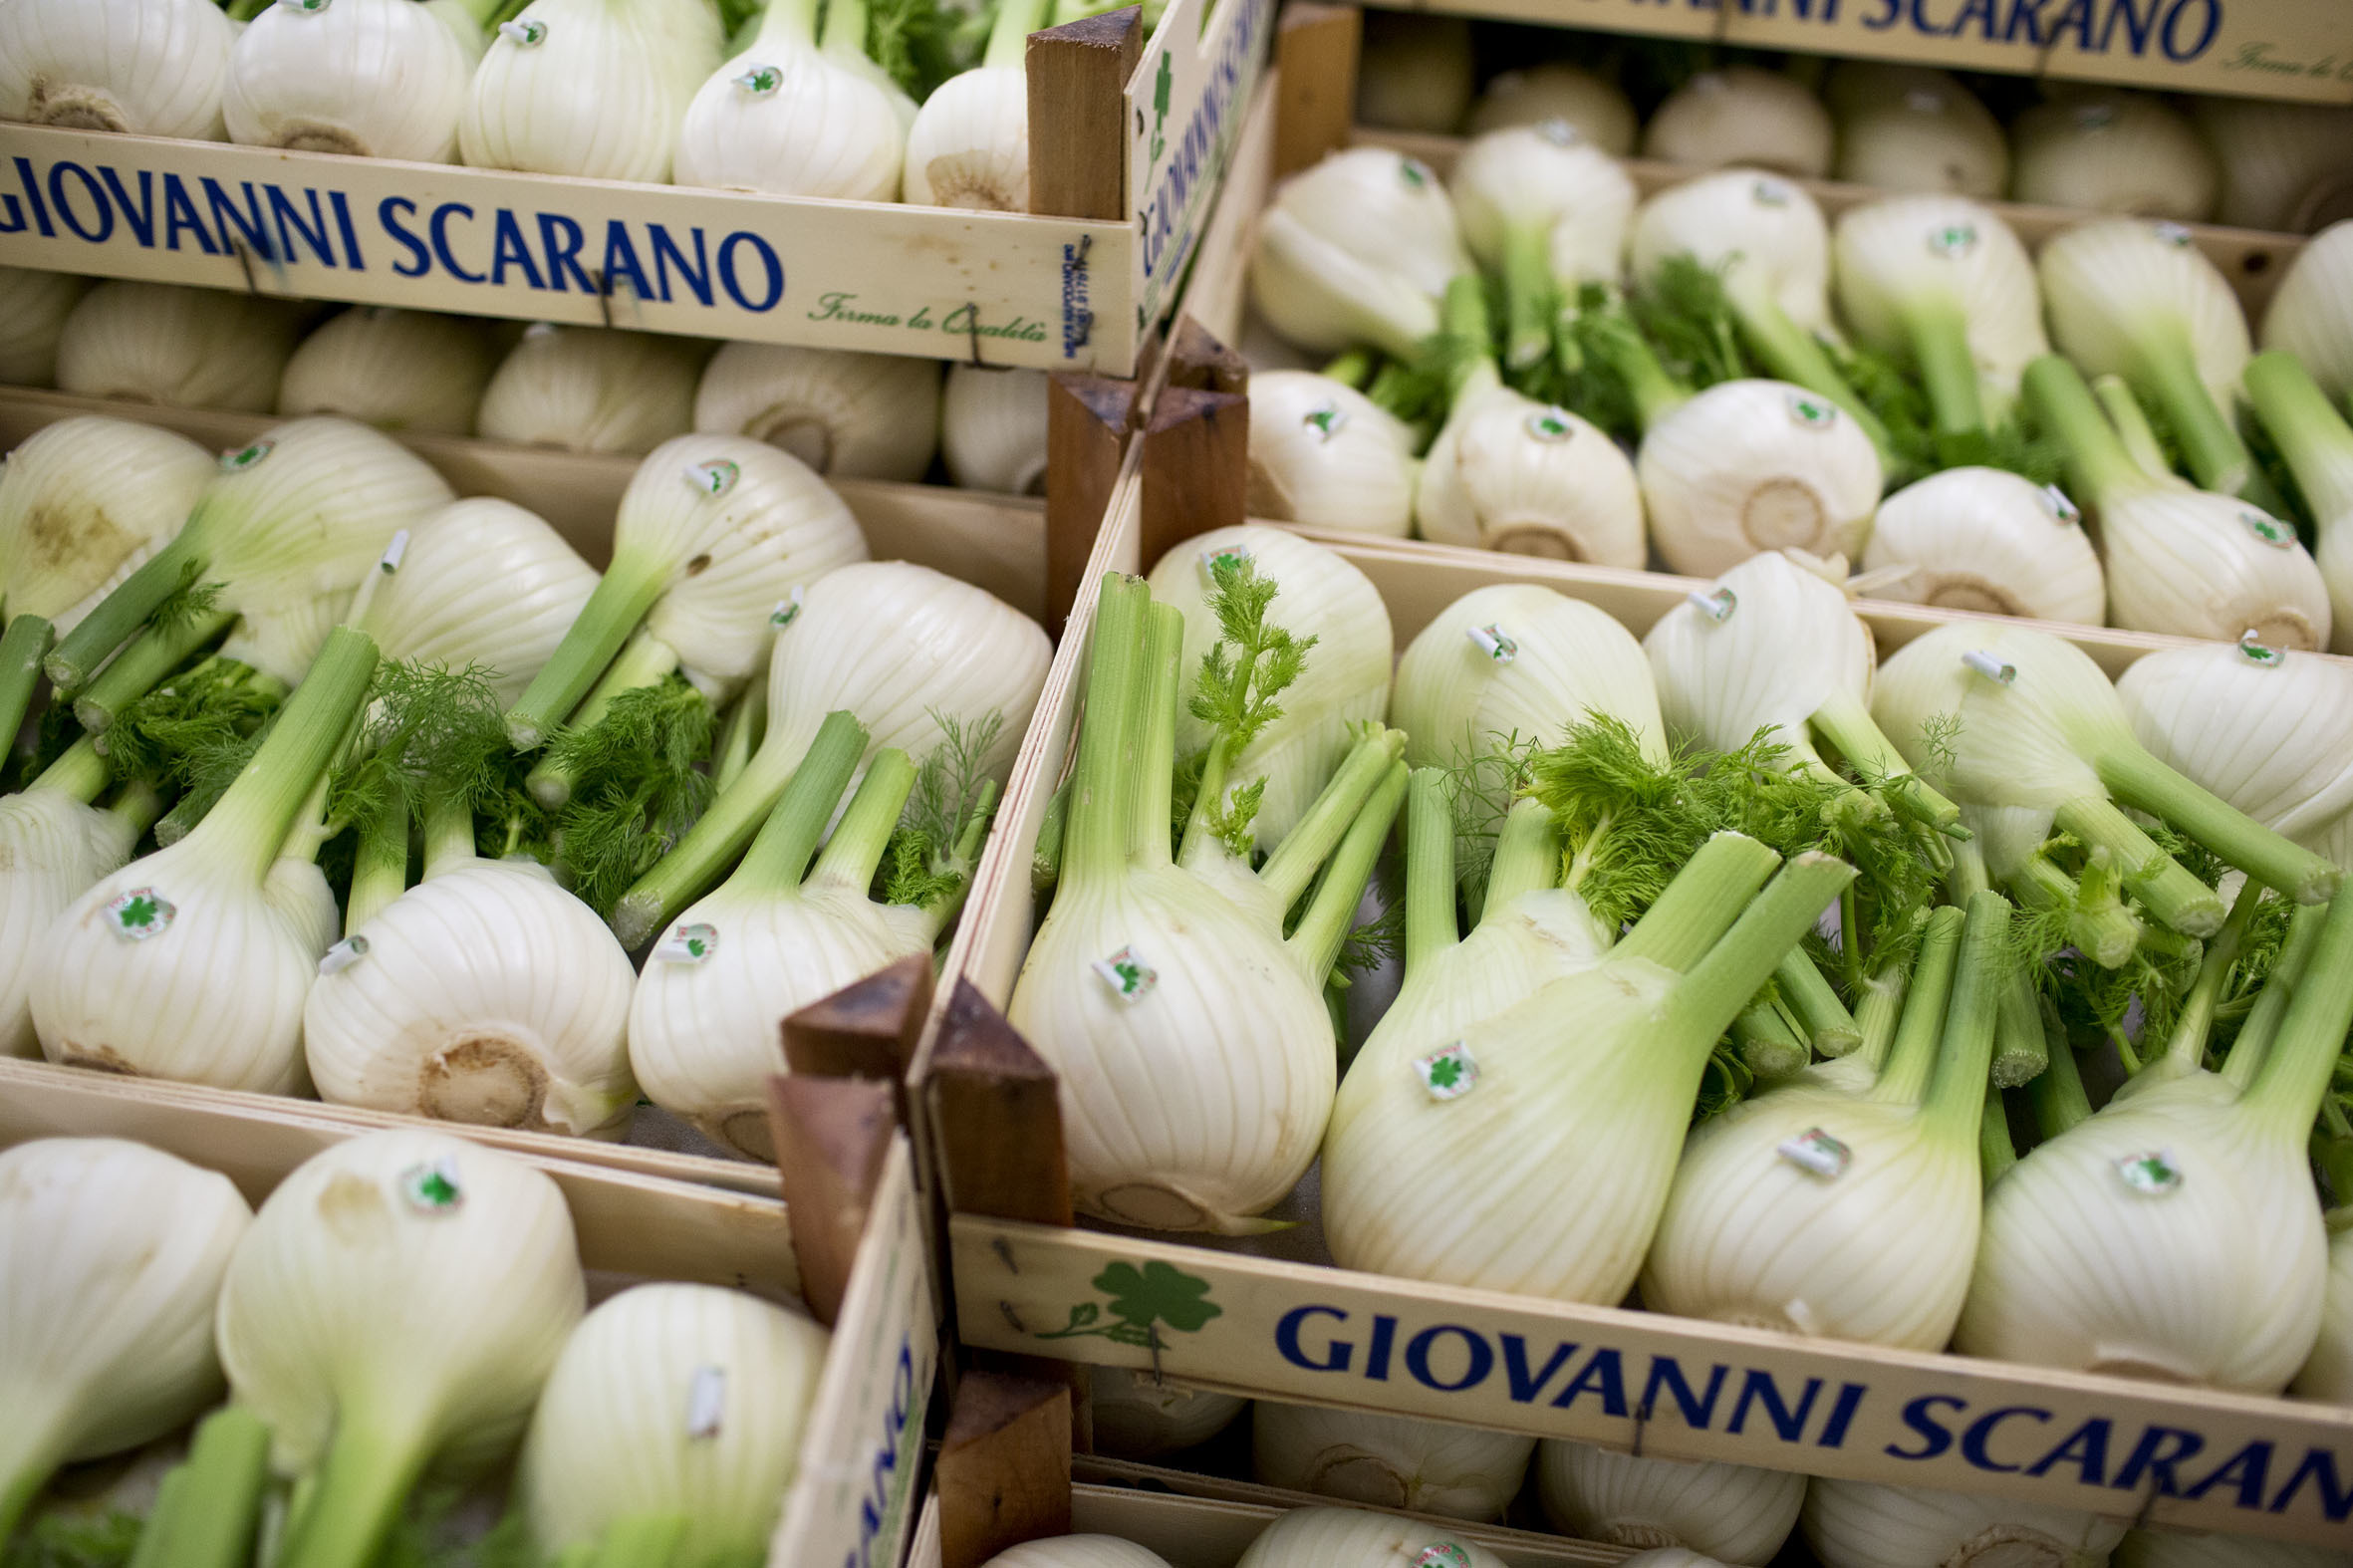 fruit-and-vegetable-market-report-march-2014-fennel.jpg?mtime=20170922112630#asset:11325